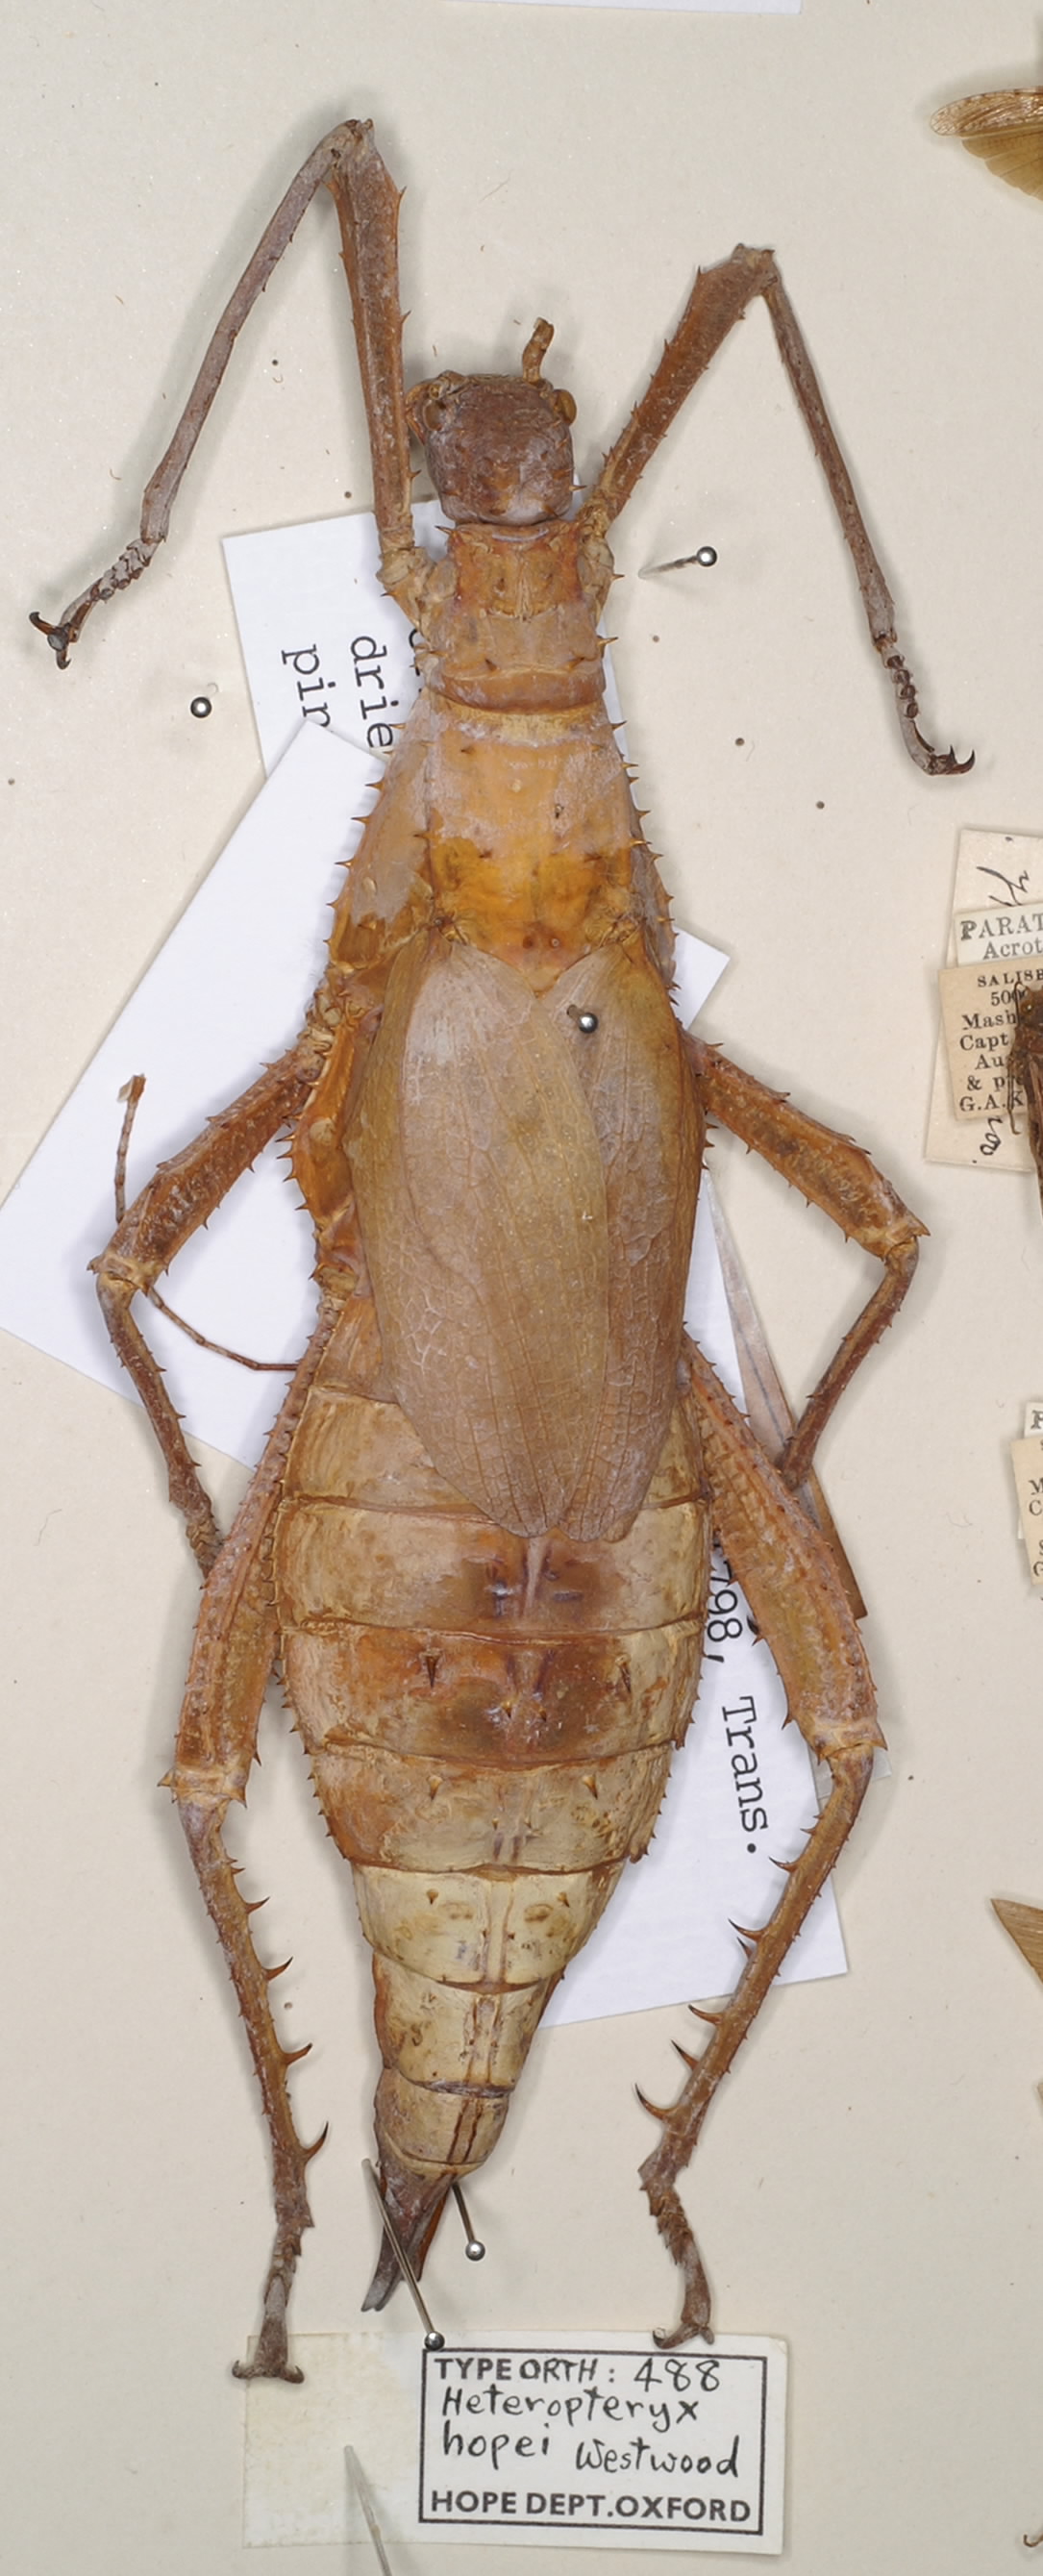 copyright UMO. female of synonym Heteropteryx hopei (holotype). Depicts CollectionObject 1559037; ceb3df22-7899-40b8-8ba0-209a6bdead98, a CollectionObject.